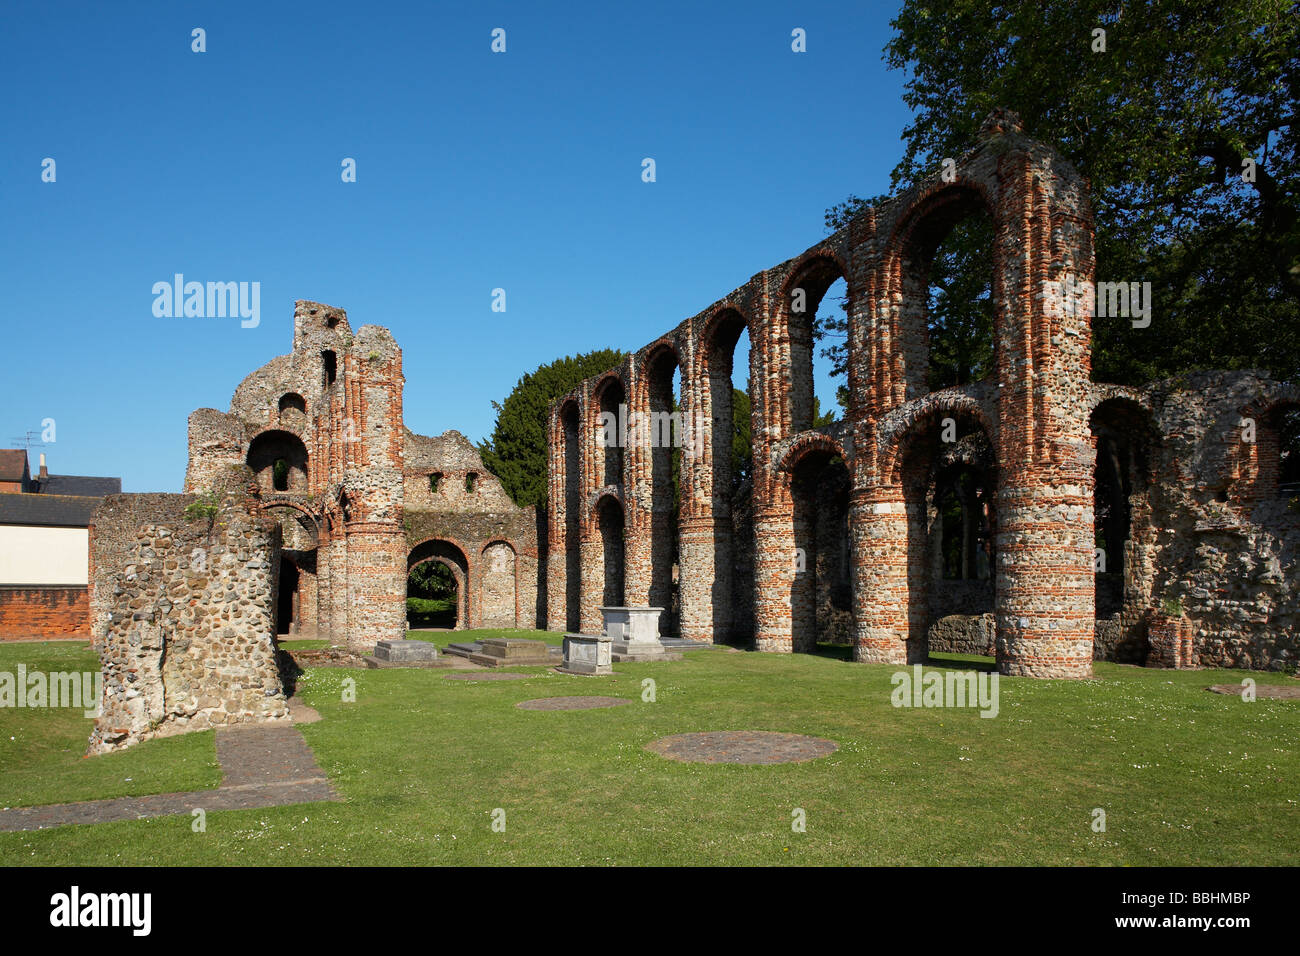 Europe Great Britain England Essex Colchester St Botolph s Priory Stock Photo